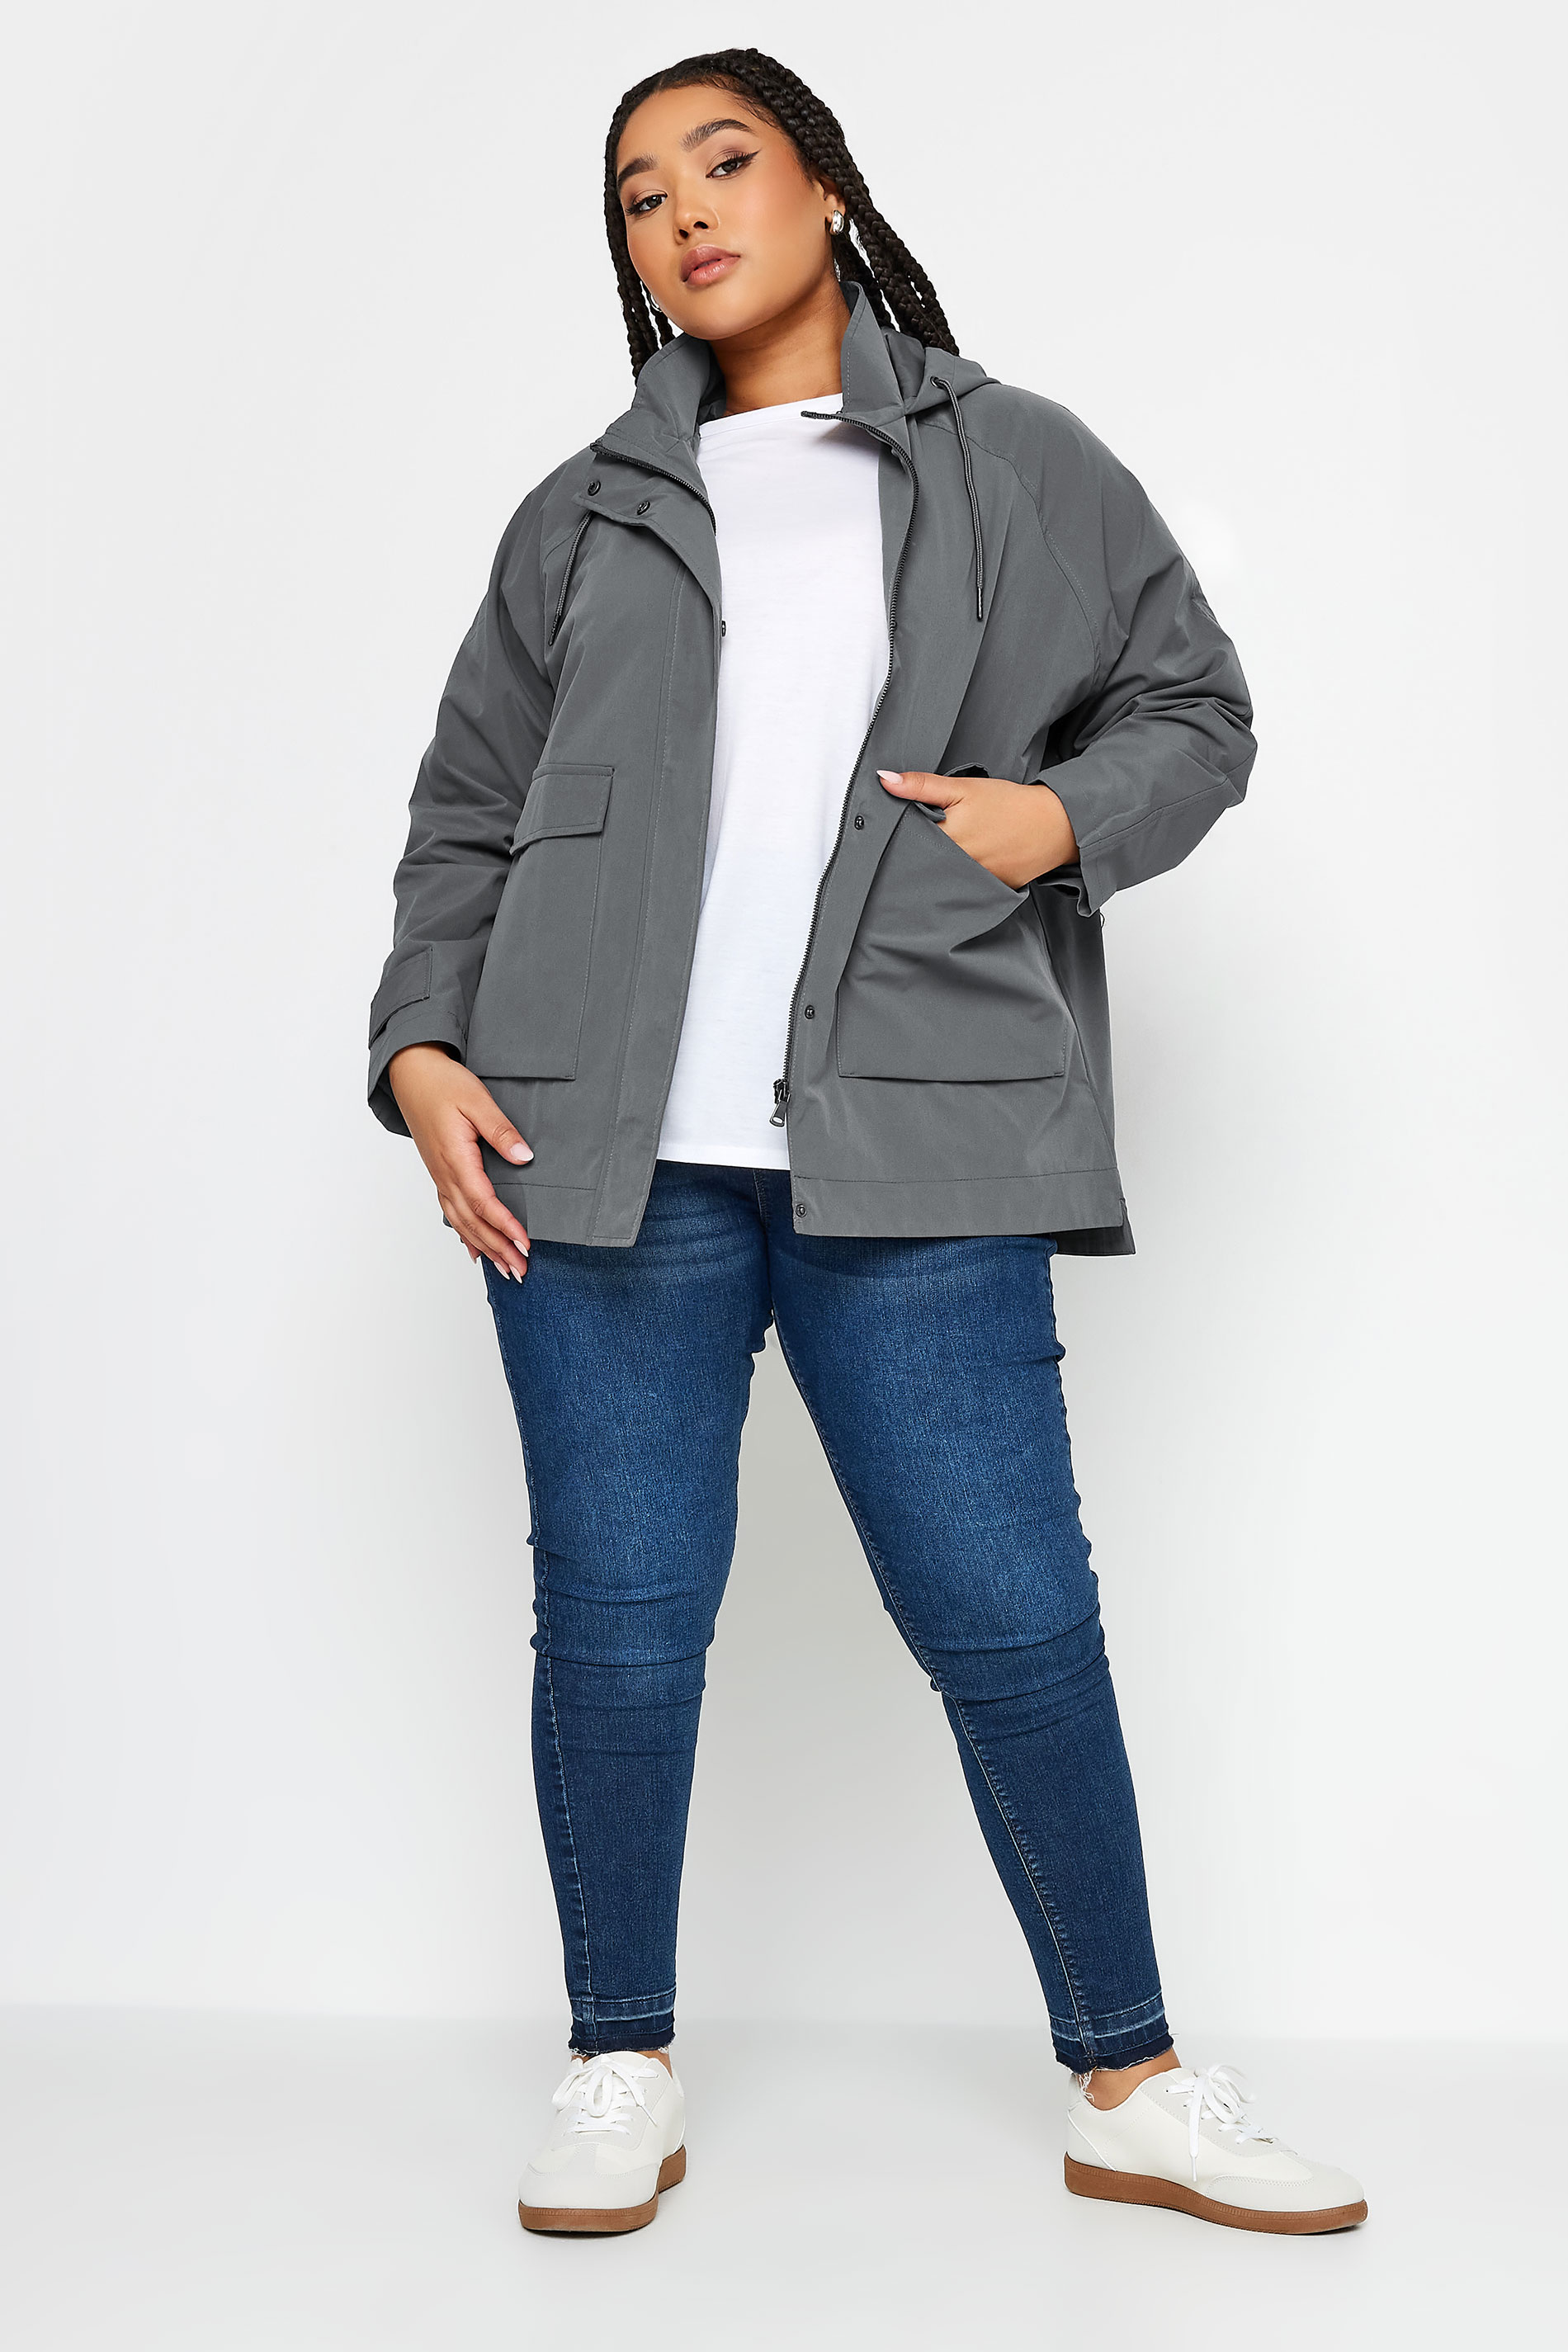 YOURS Plus Size Charcoal Grey Raglan Lightweight Jacket | Yours Clothing 2